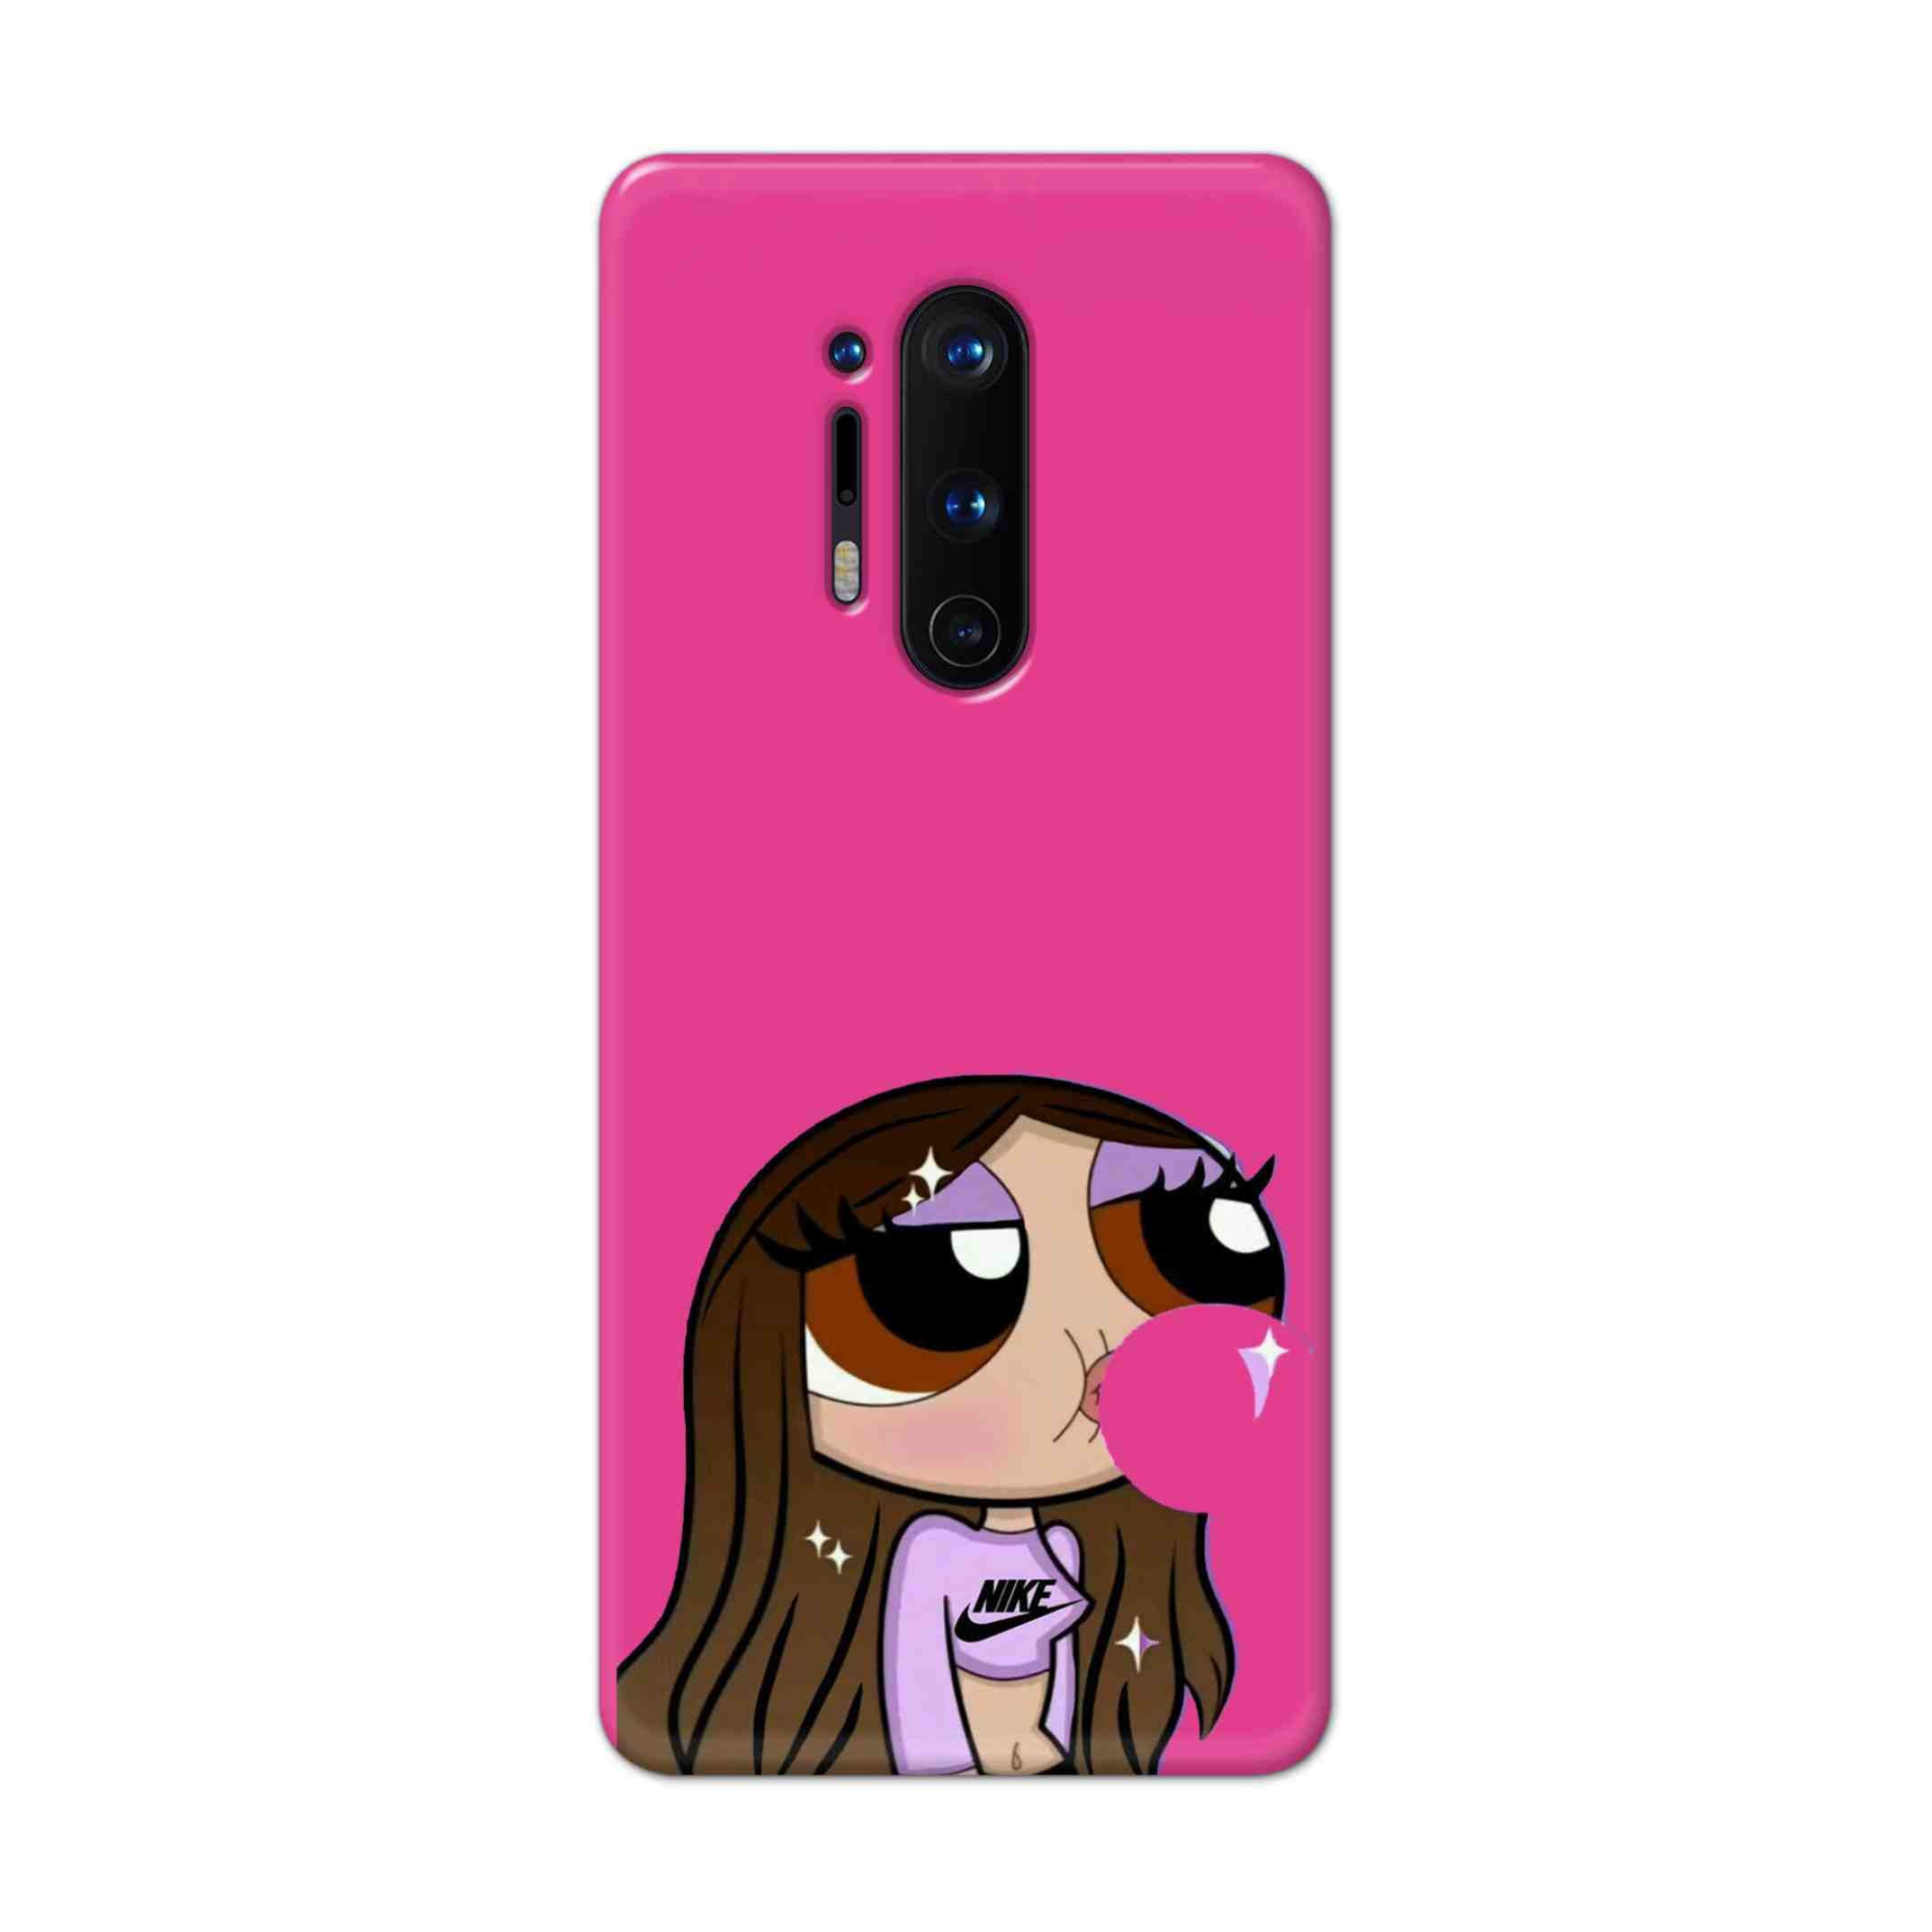 Buy Bubble Girl Hard Back Mobile Phone Case Cover For OnePlus 8 Pro Online